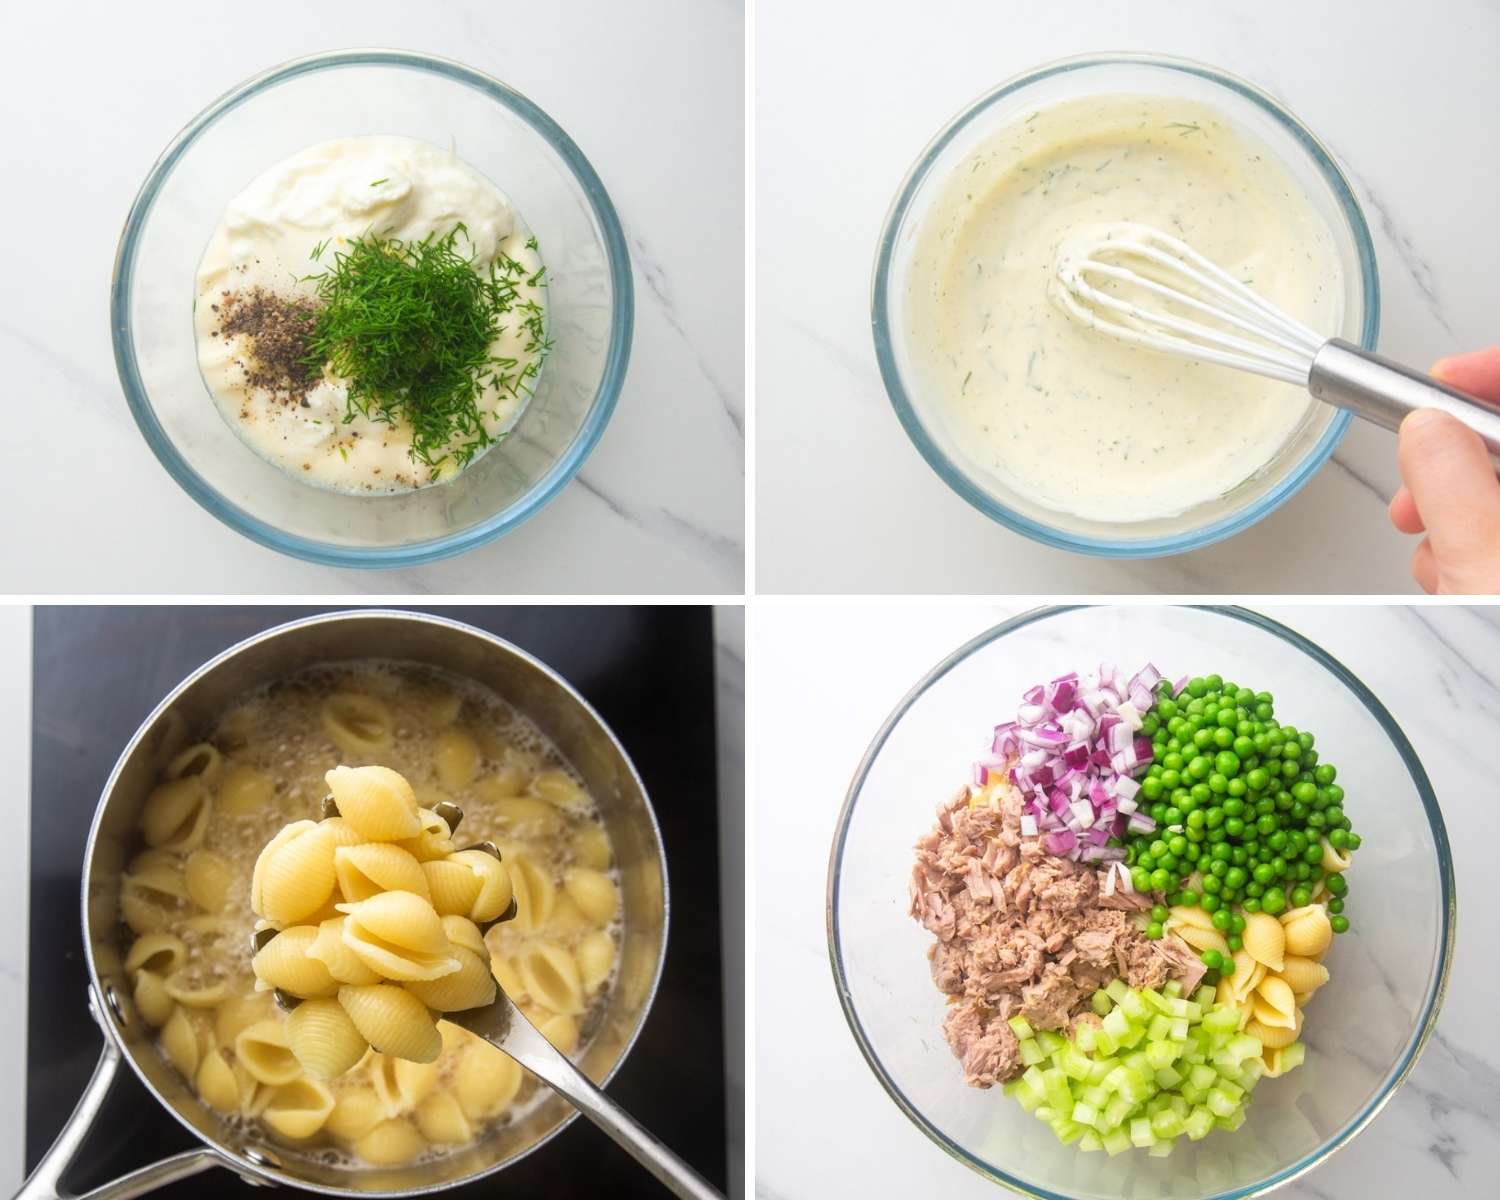 four images showing steps to take when making homemade tuna pasta salad from scratch. 